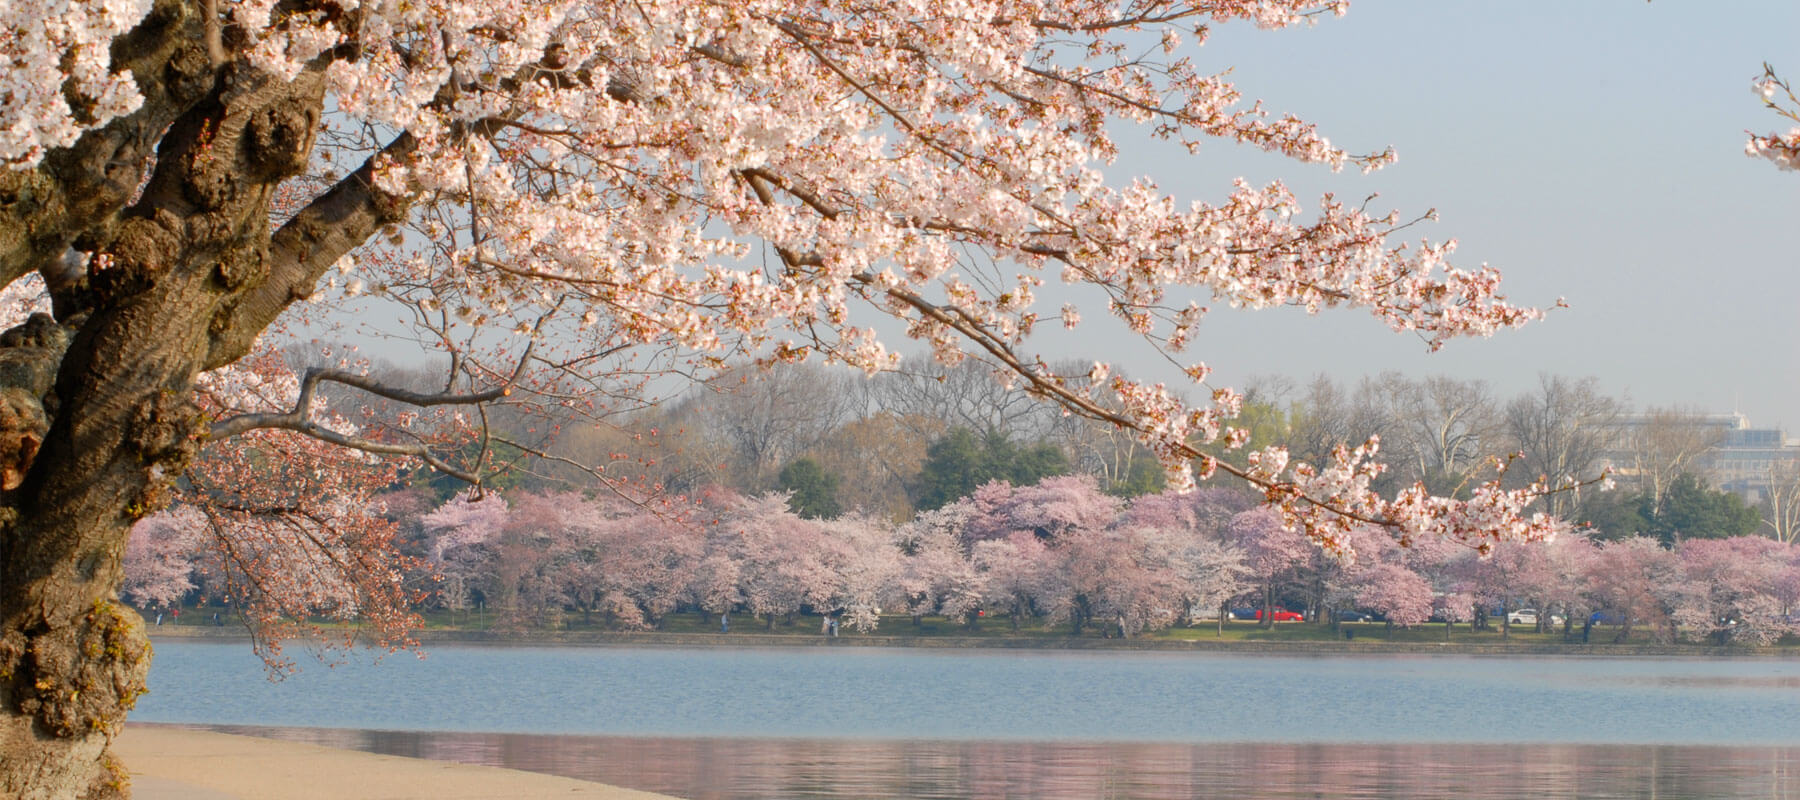 What to Know About the Cherry Blossoms in Washington, DC